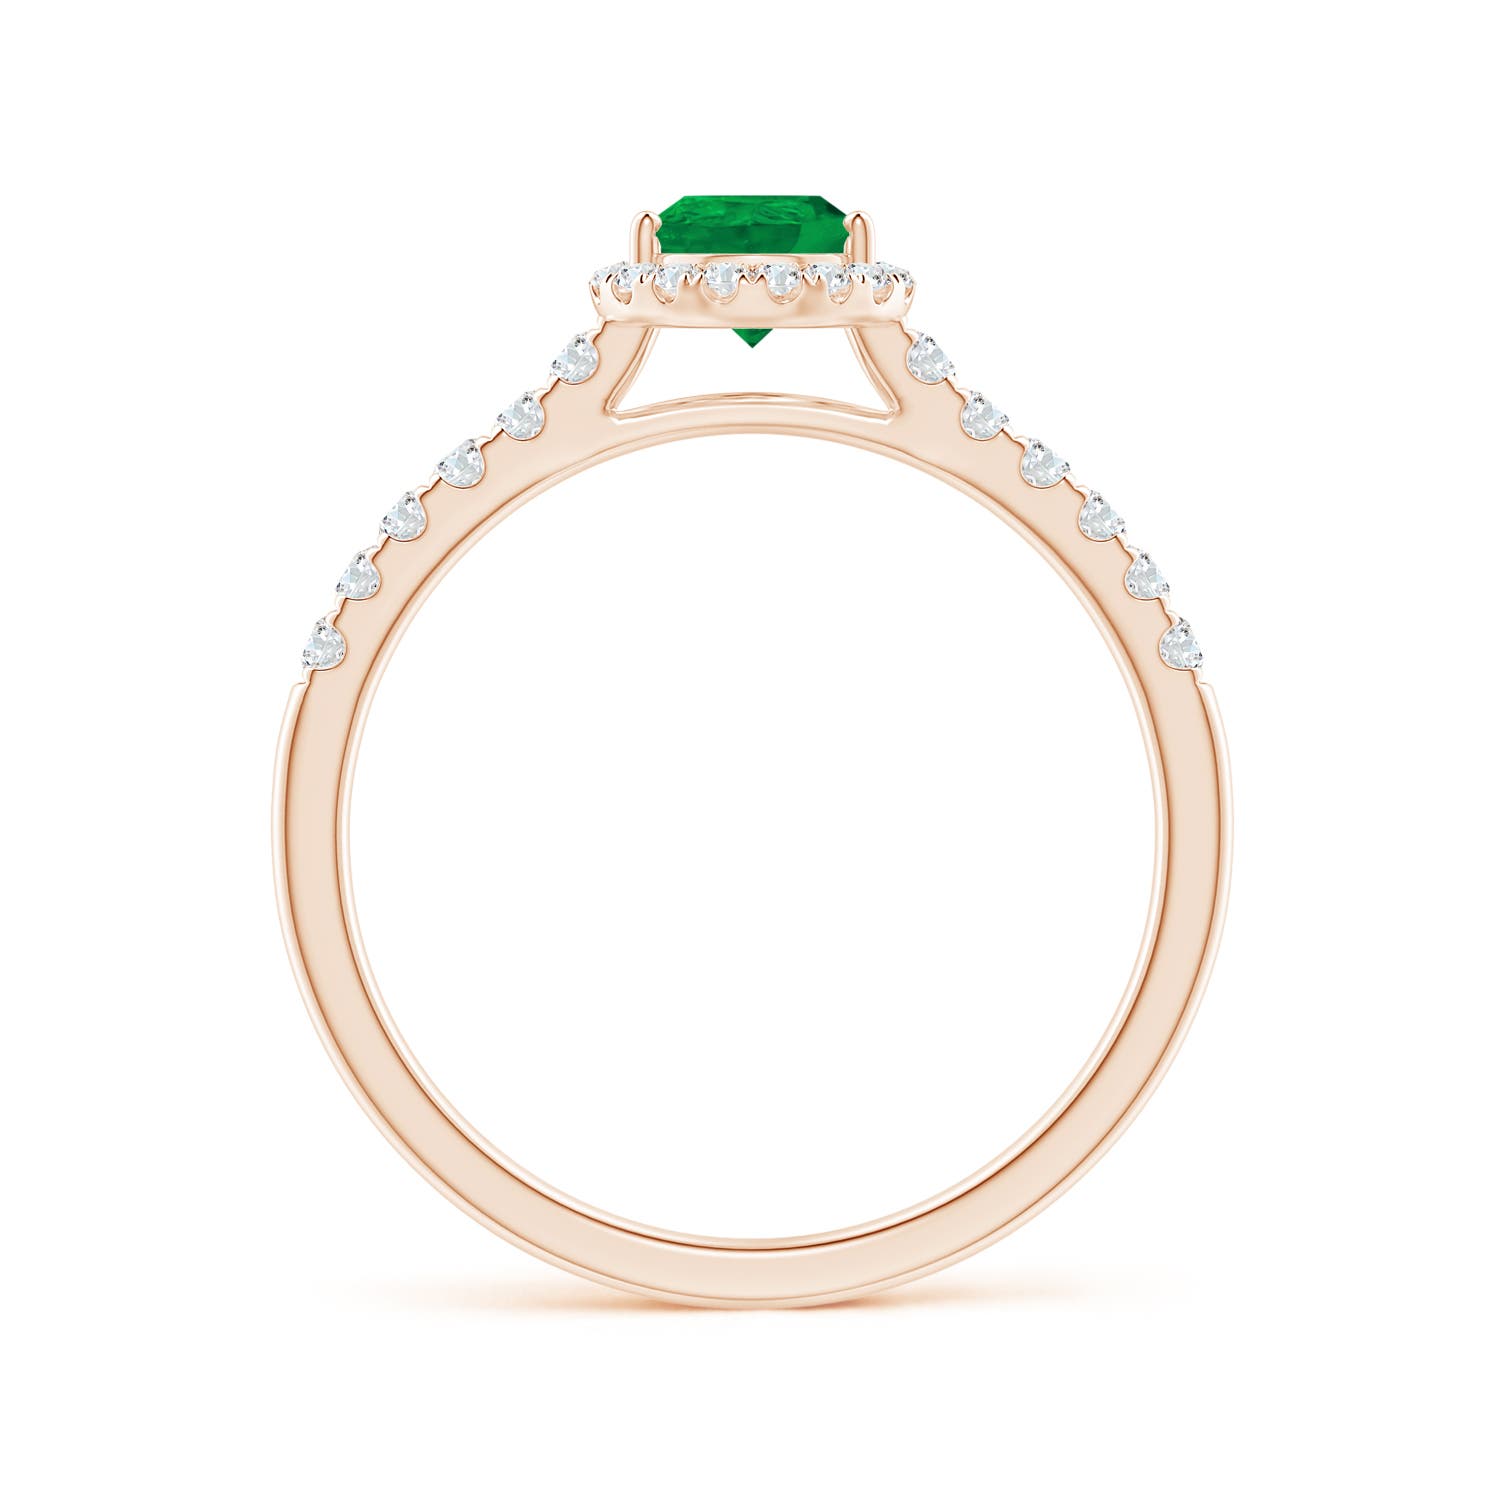 AA - Emerald / 0.88 CT / 14 KT Rose Gold